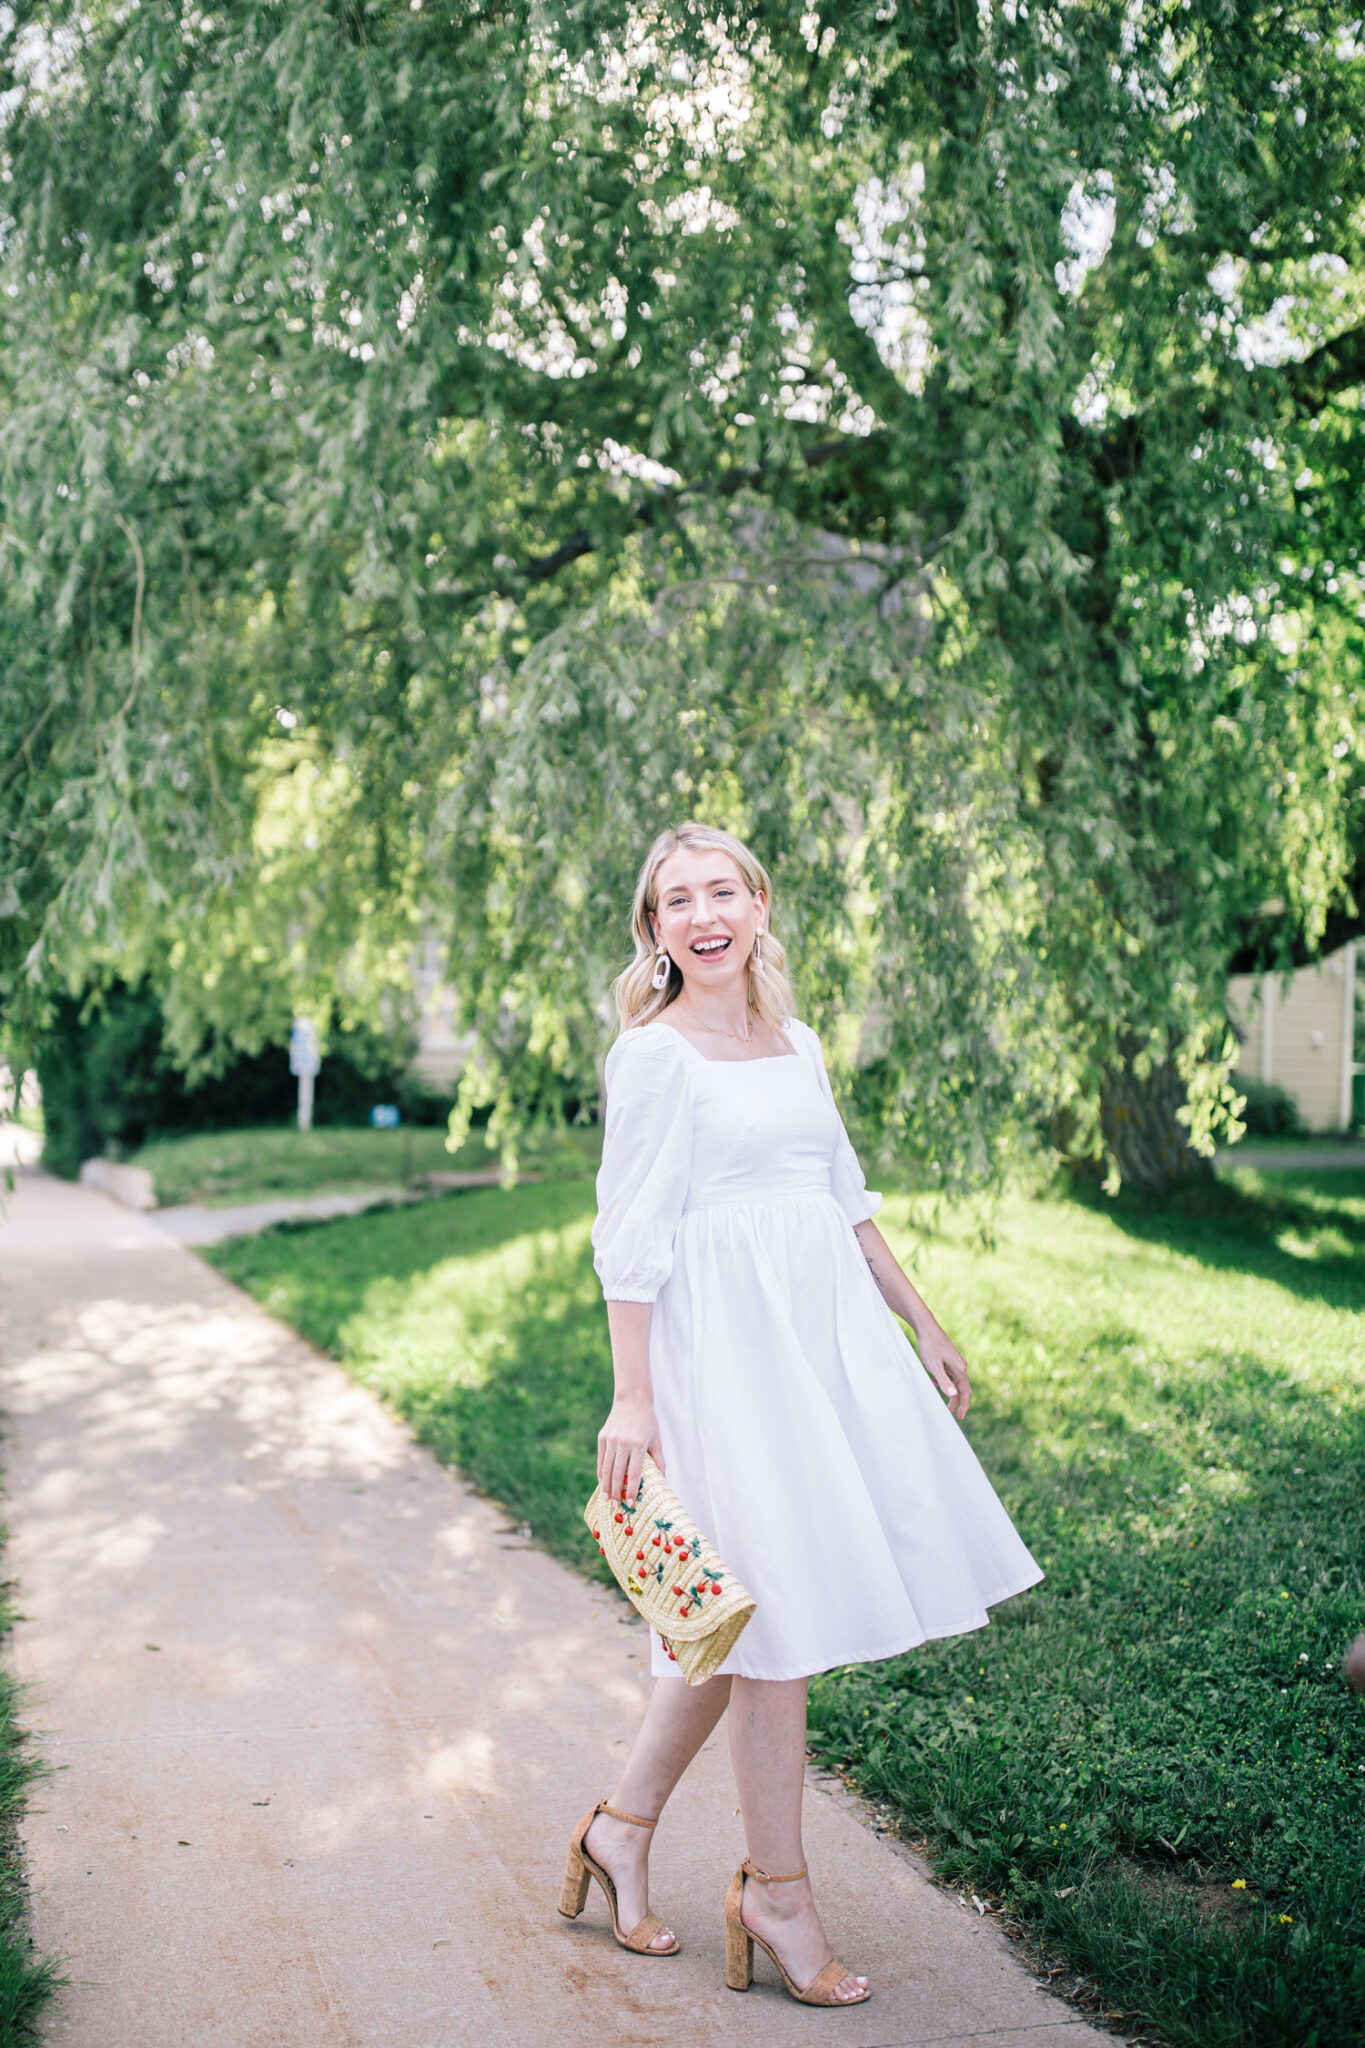 Classic in White | The Blondielocks | Life + Style